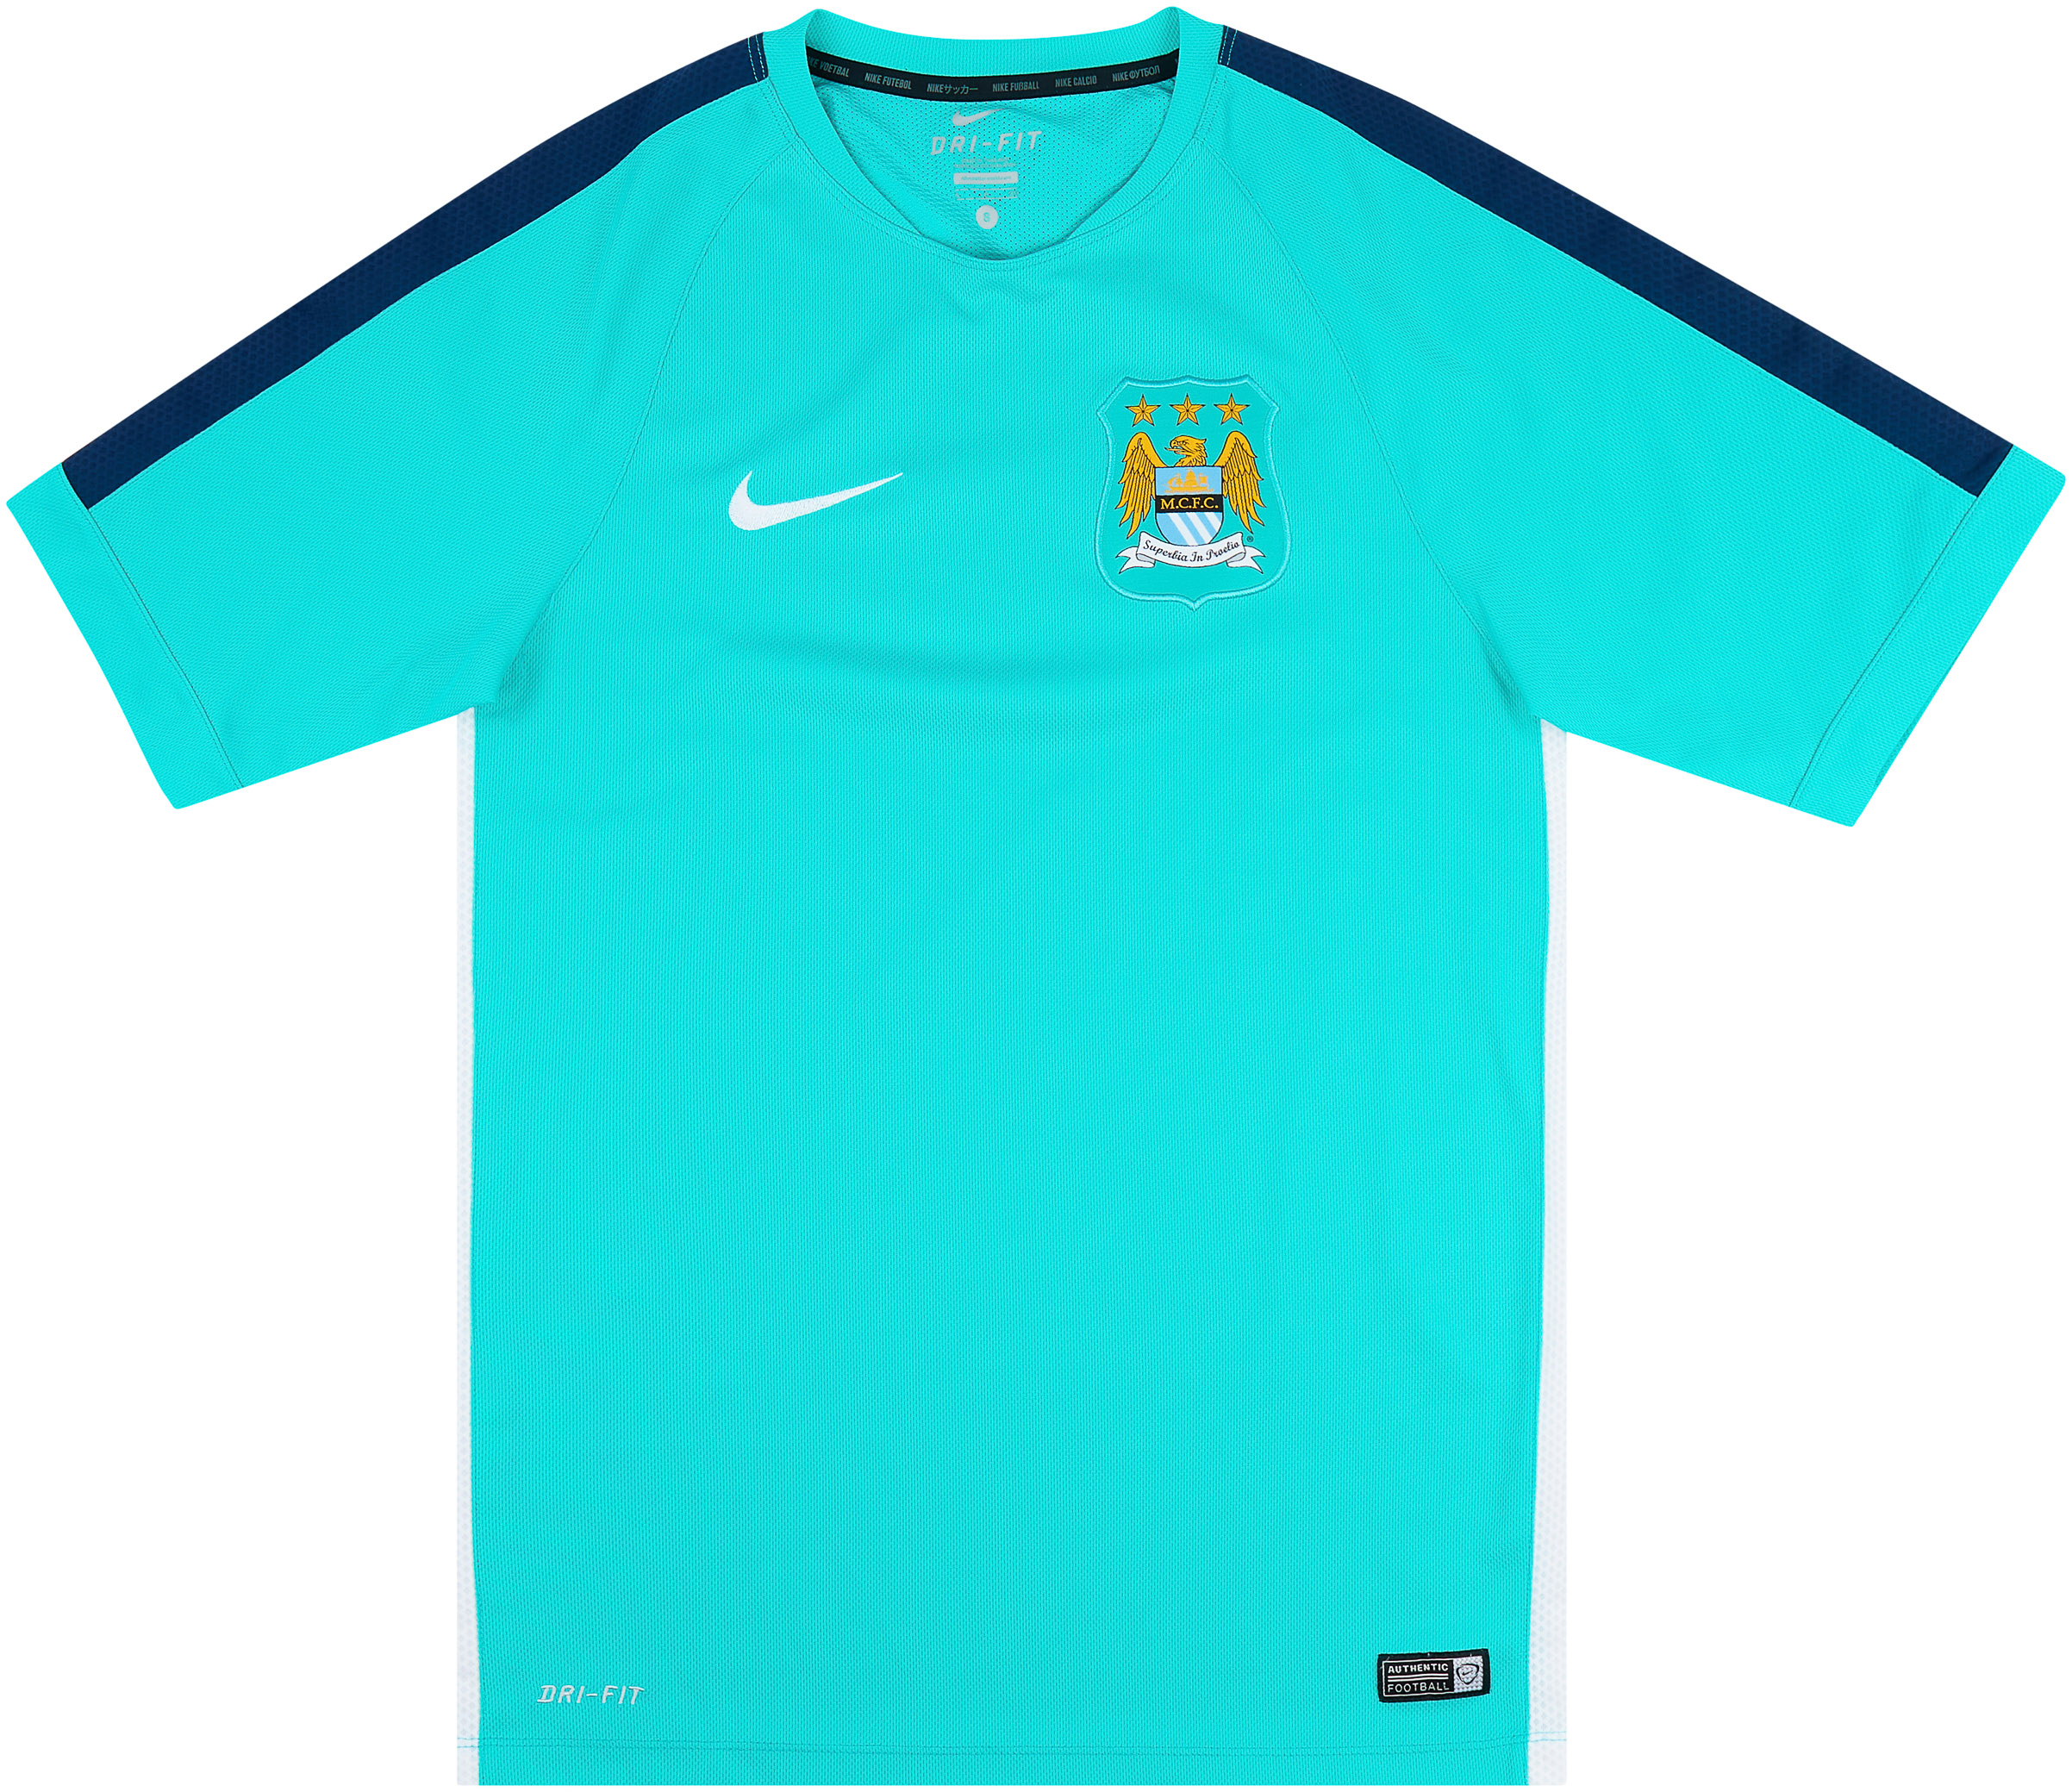 2015-16 Manchester City Nike Training Shirt - Excellent 9/10 - (S)